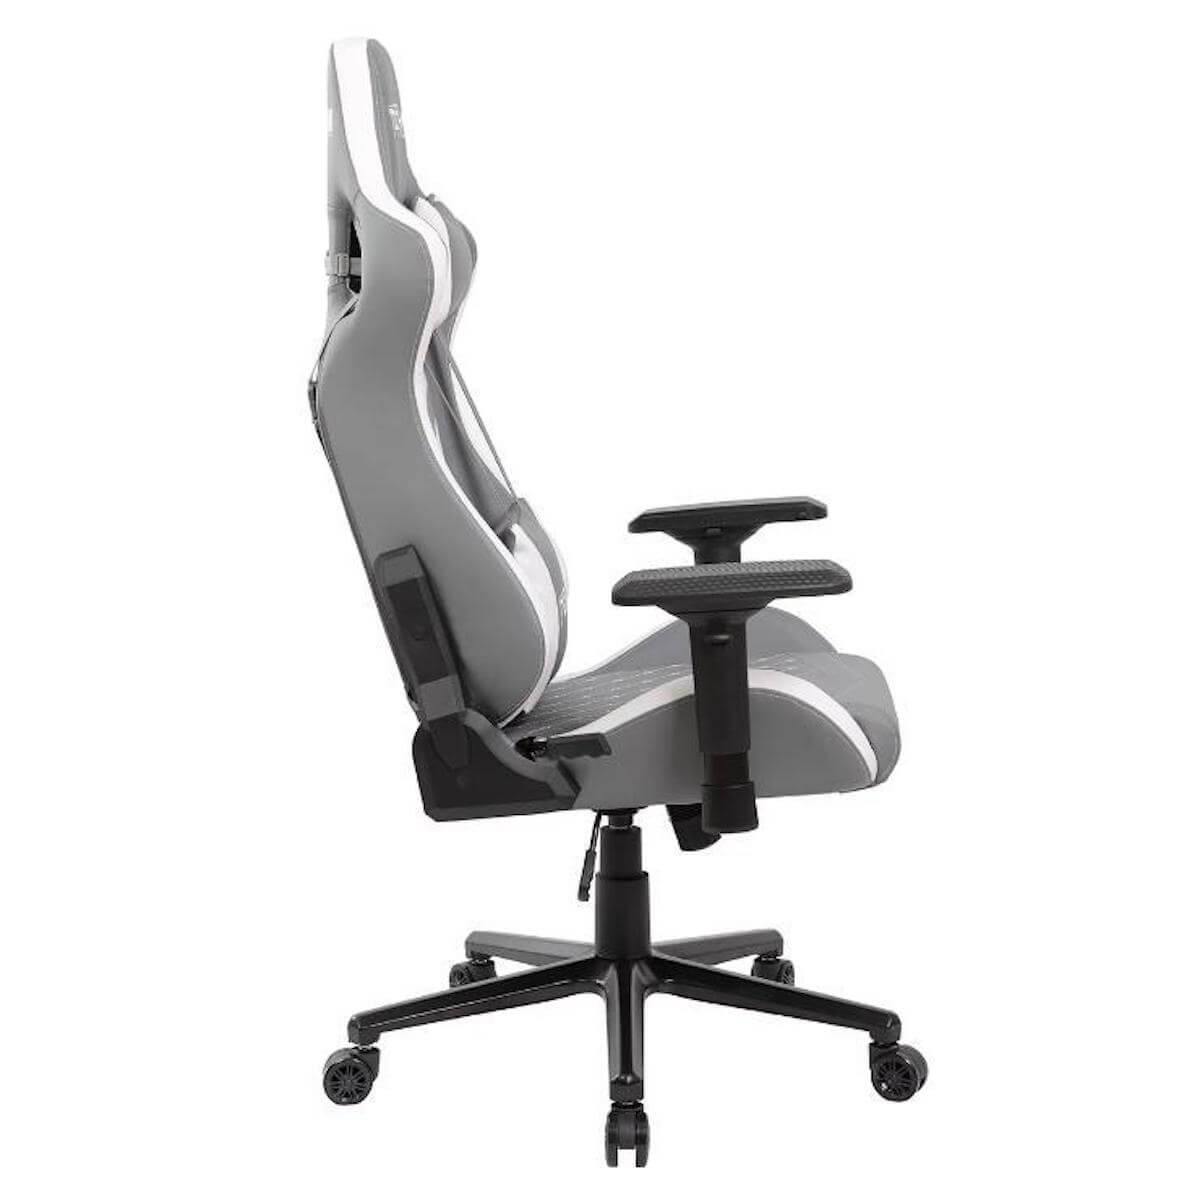 Techni Sport TS-83 White Ergonomic High Black Racer Style PC Gaming Chair RTA-TS83-GRY-WHT Side #color_white